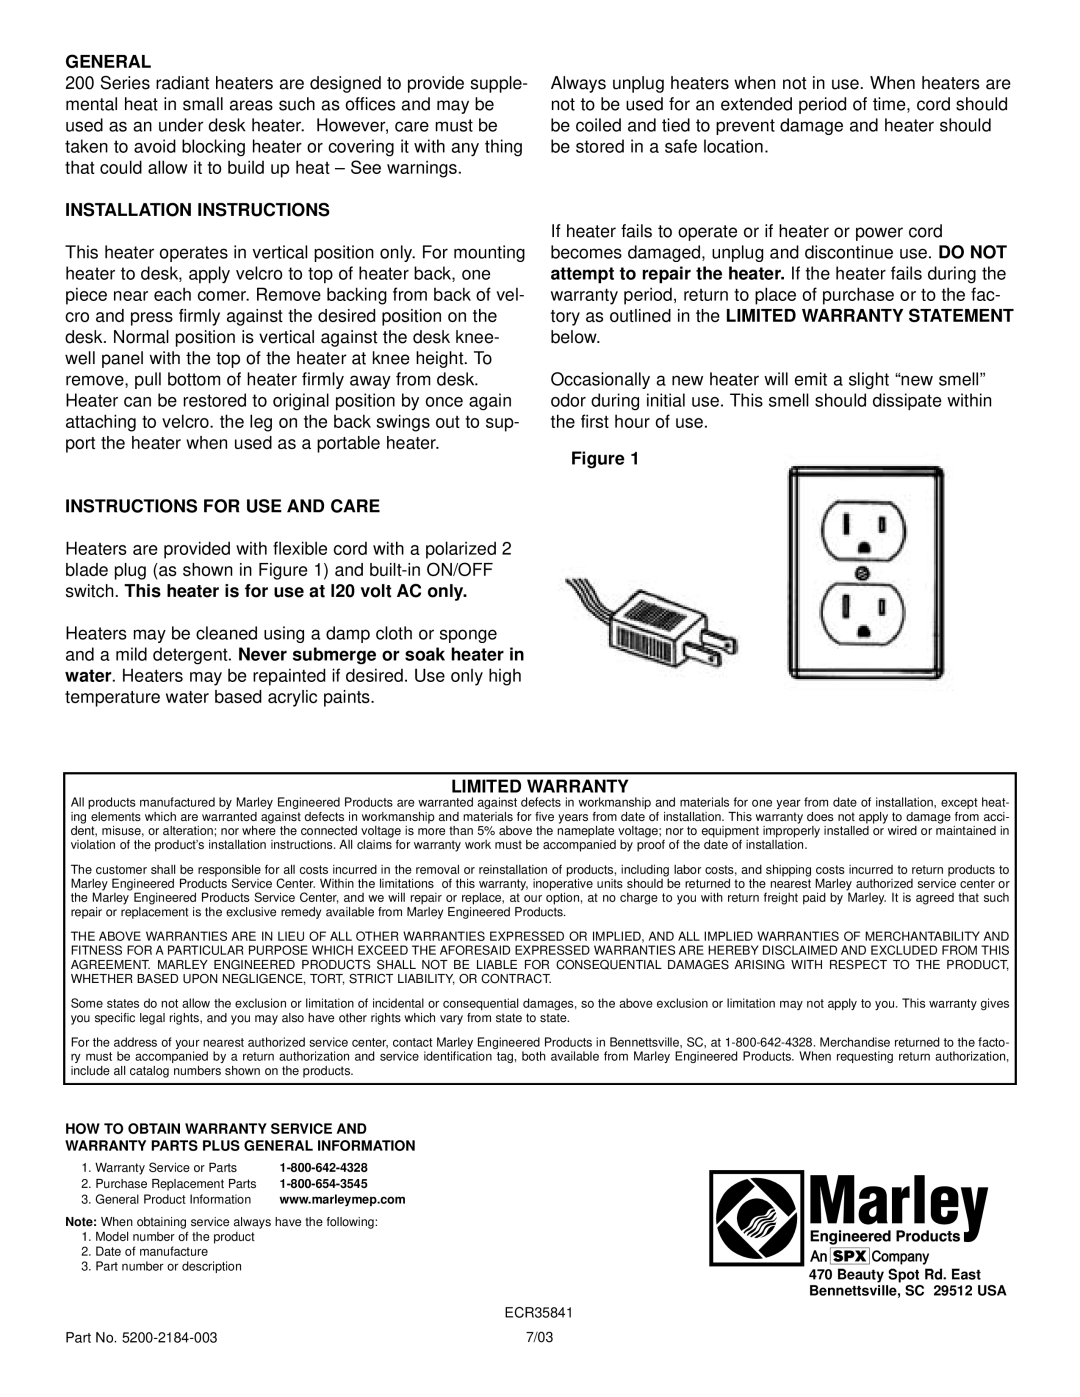 Marley Engineered Products Radiant Heater warranty General, Installation Instructions, Instructions For Use And Care 